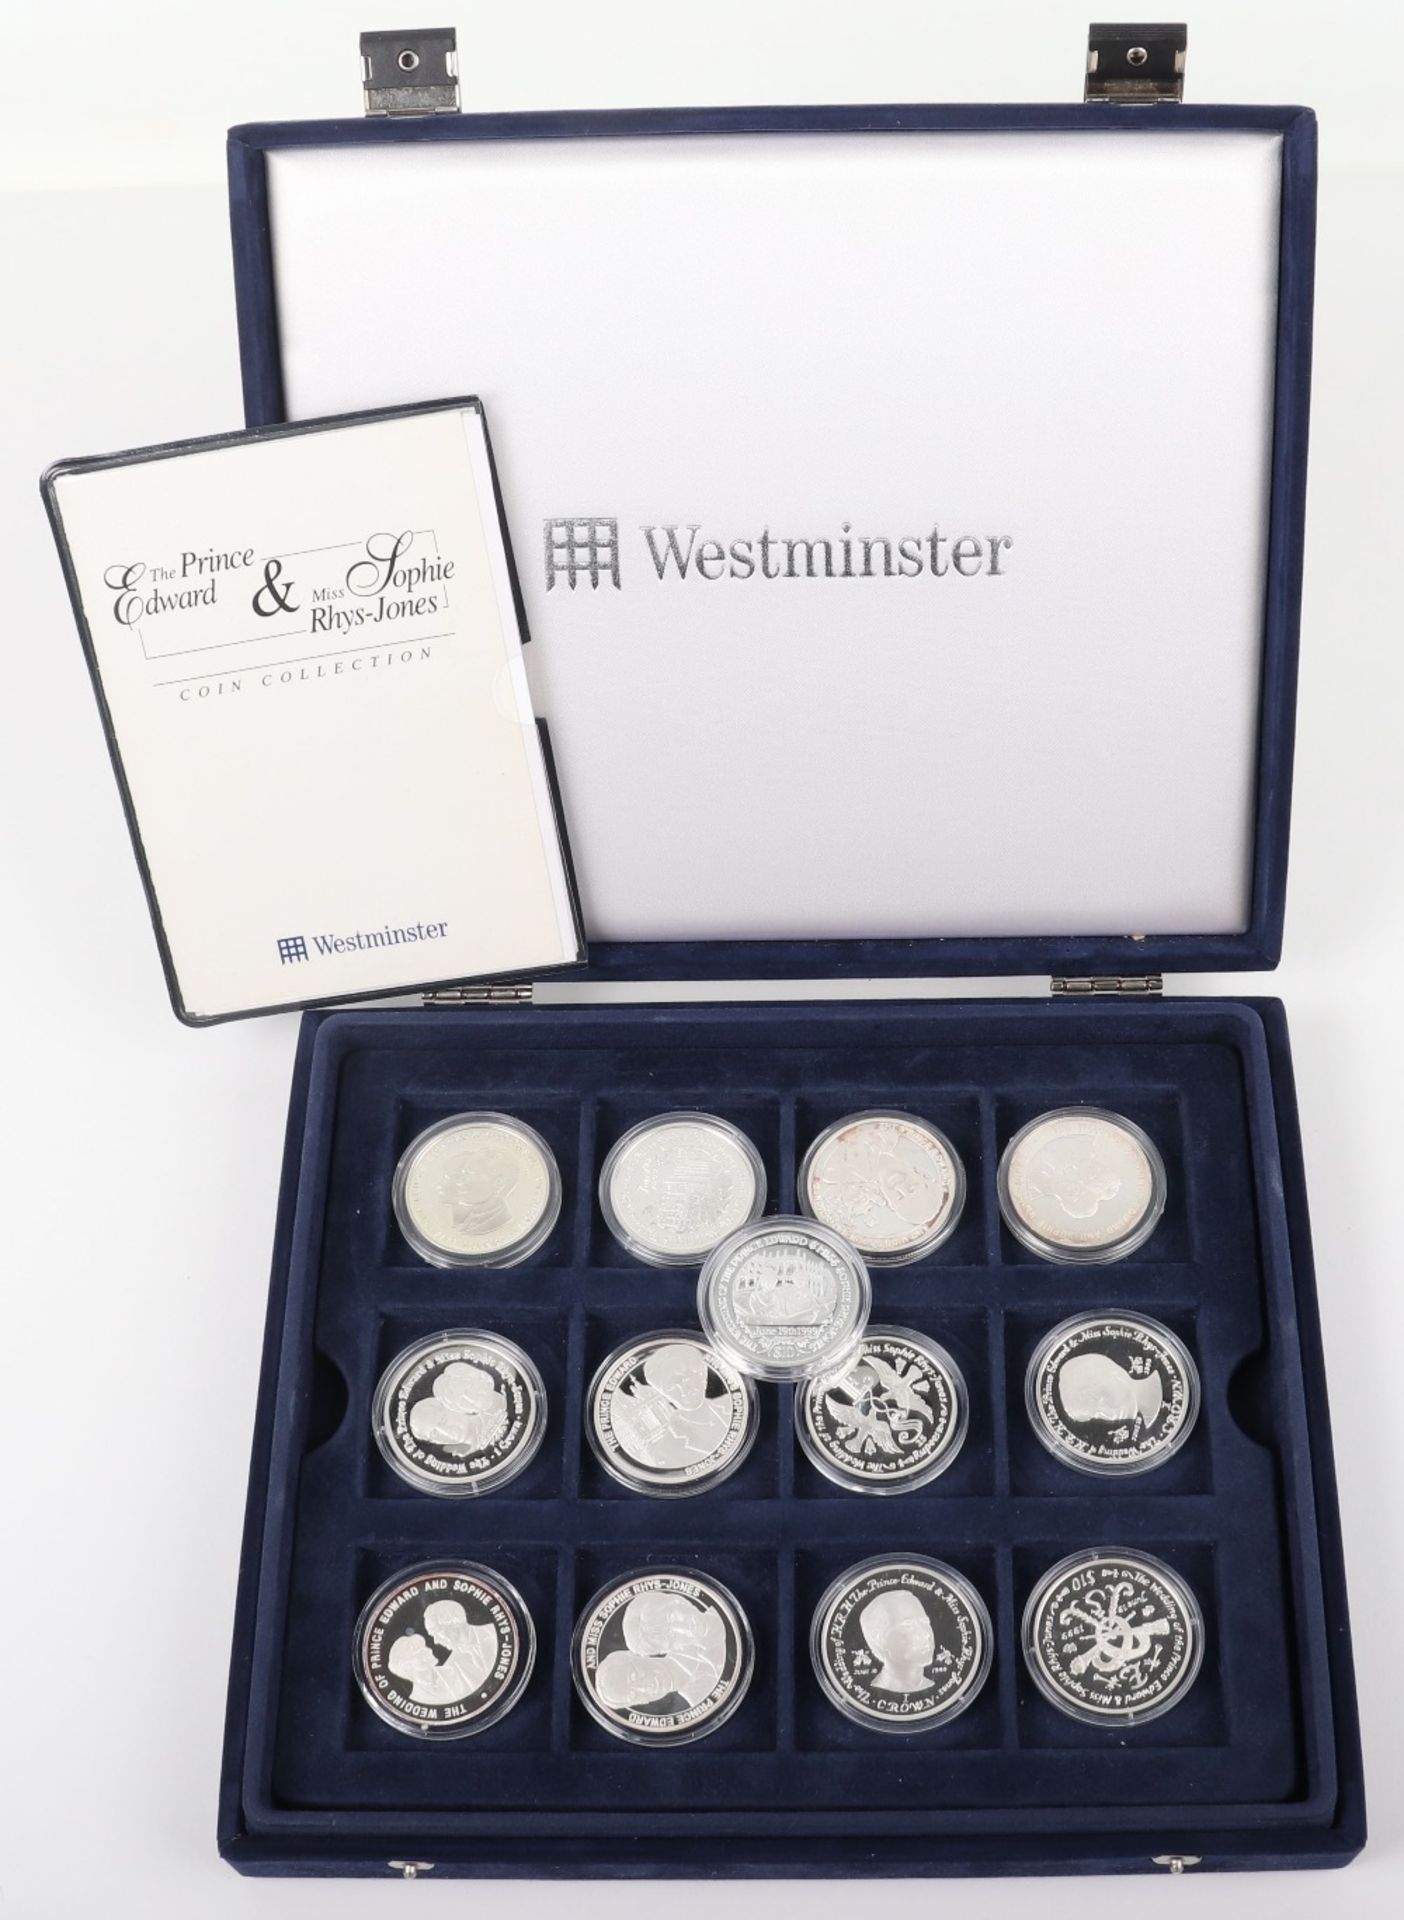 The Prince Edward & Miss Sophie Rhys-Jones silver coin collection